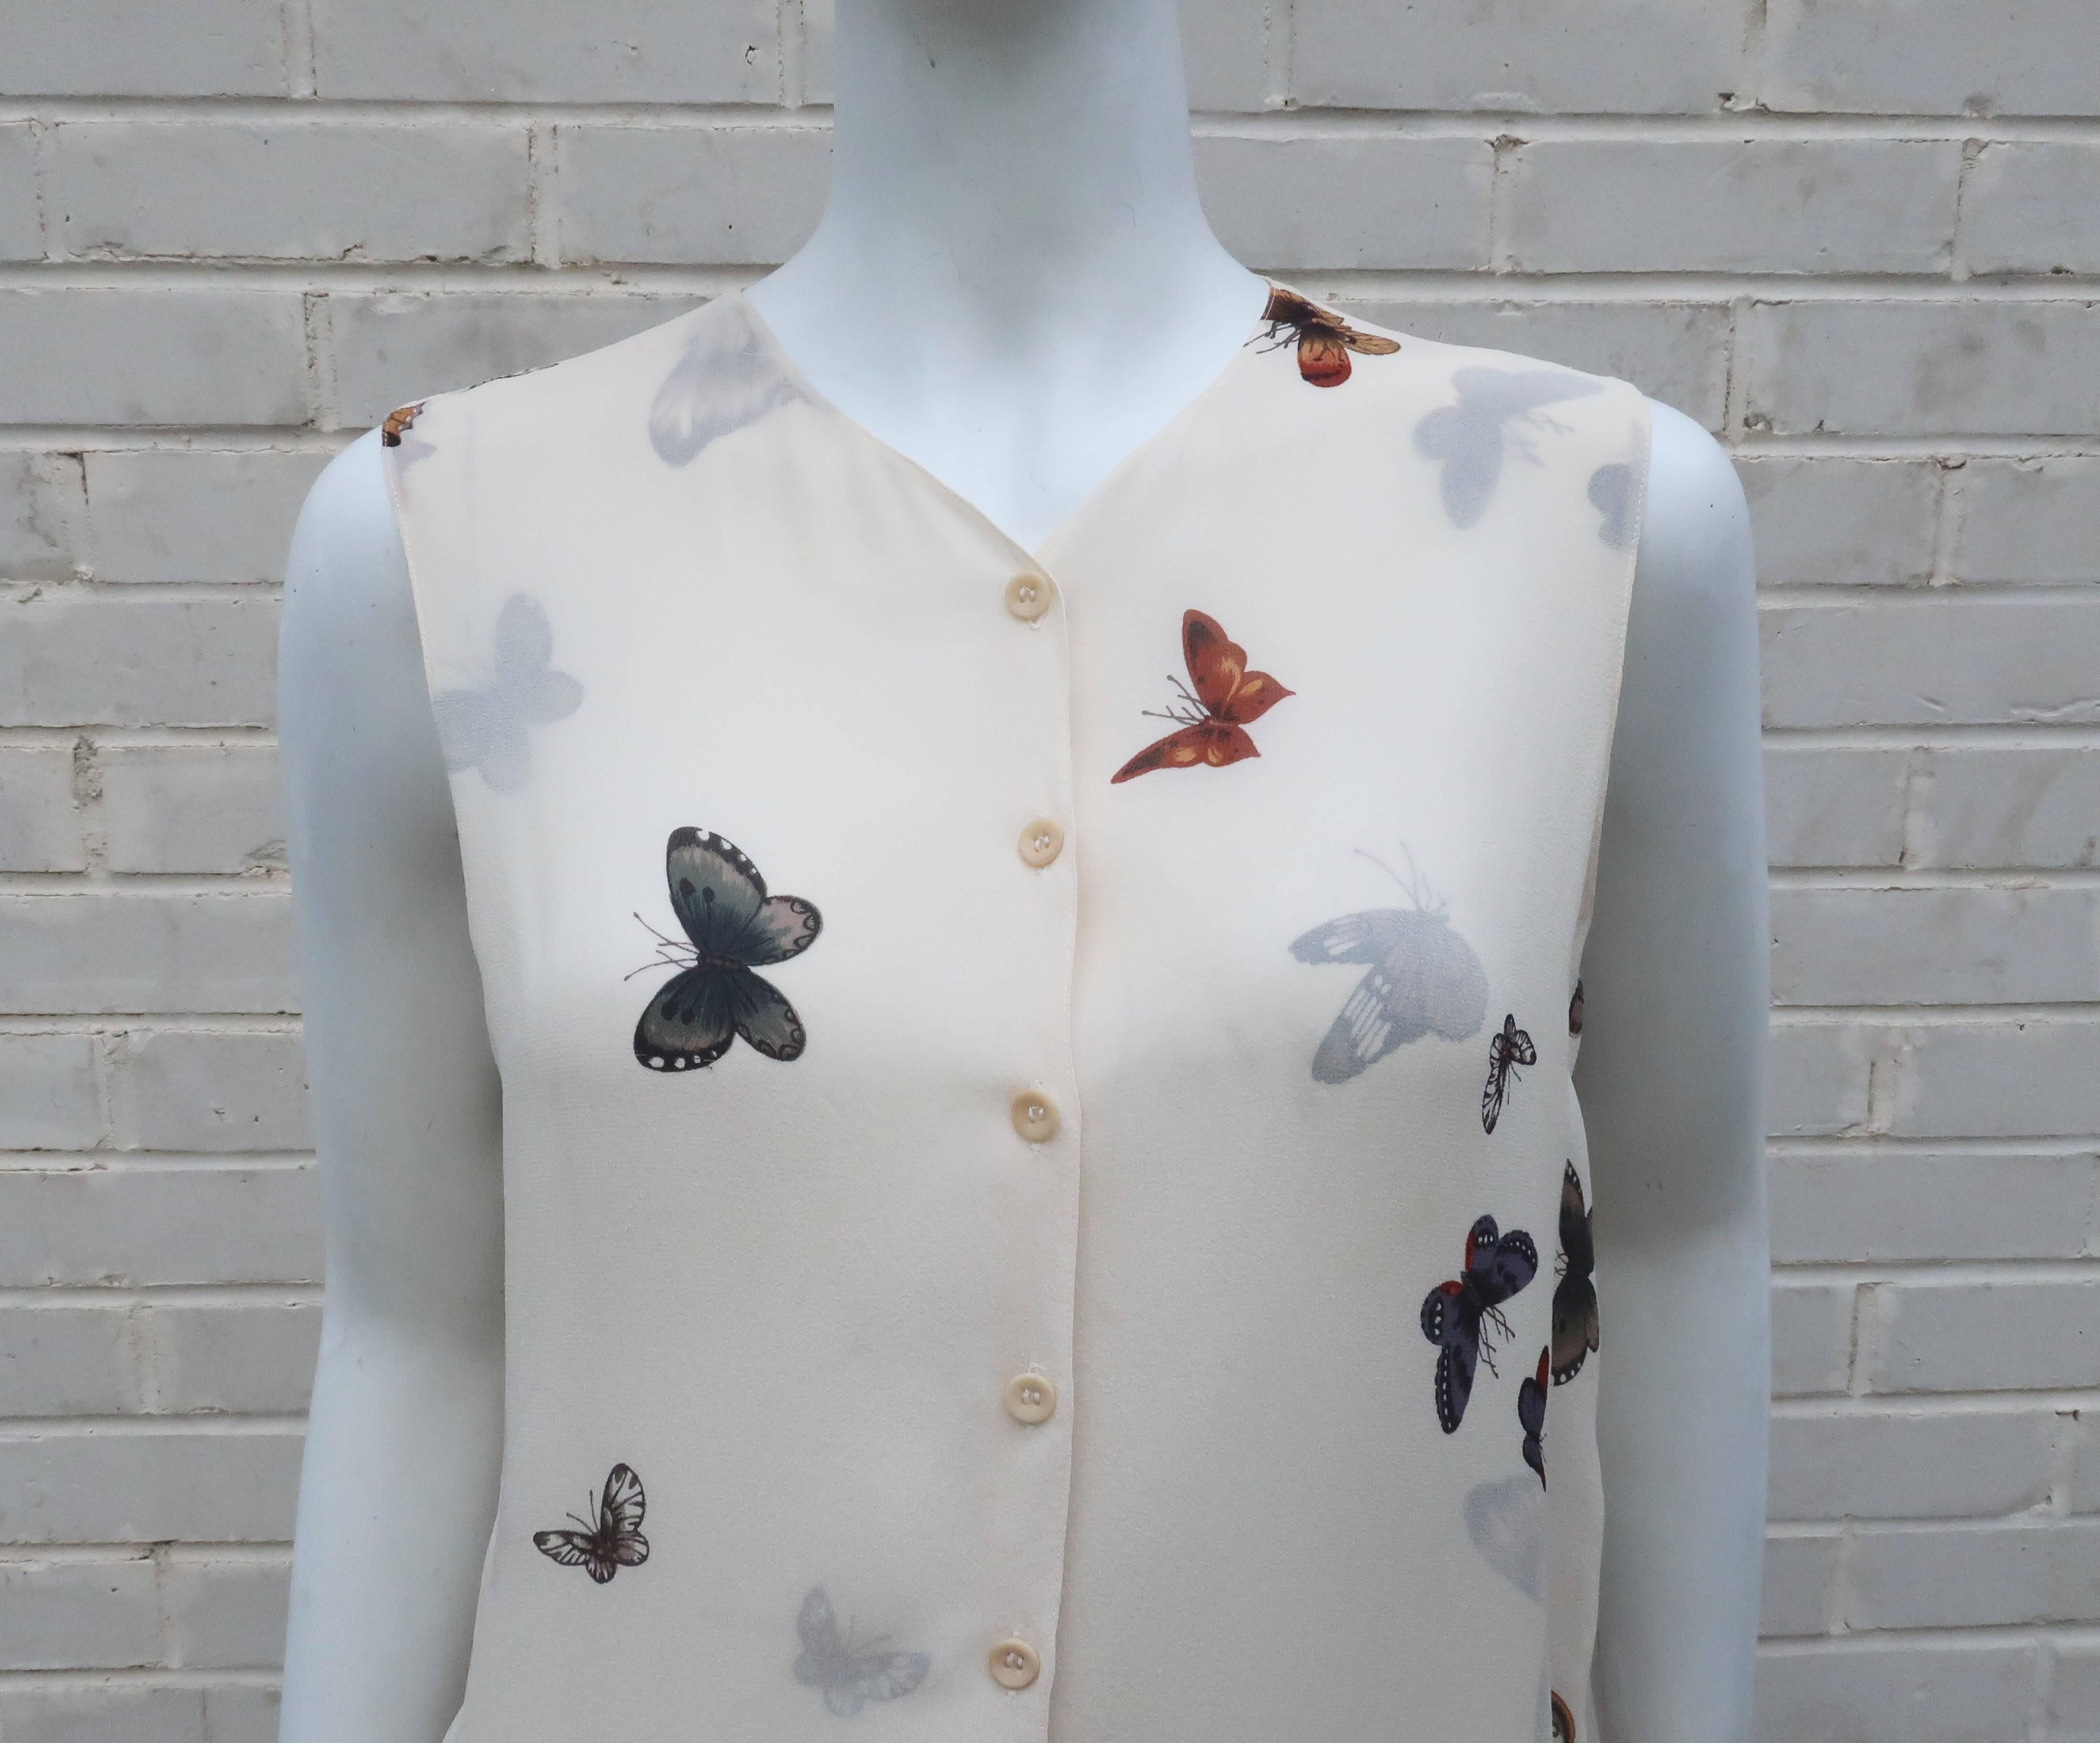 Emanuel Ungaro was known for using soft and fluid fabrics.  This wispy silk chiffon top fits that mold.  The double layer of chiffon creates a beautiful visage of butterflies and moths swirling across the exterior and interior for an interesting 3-D